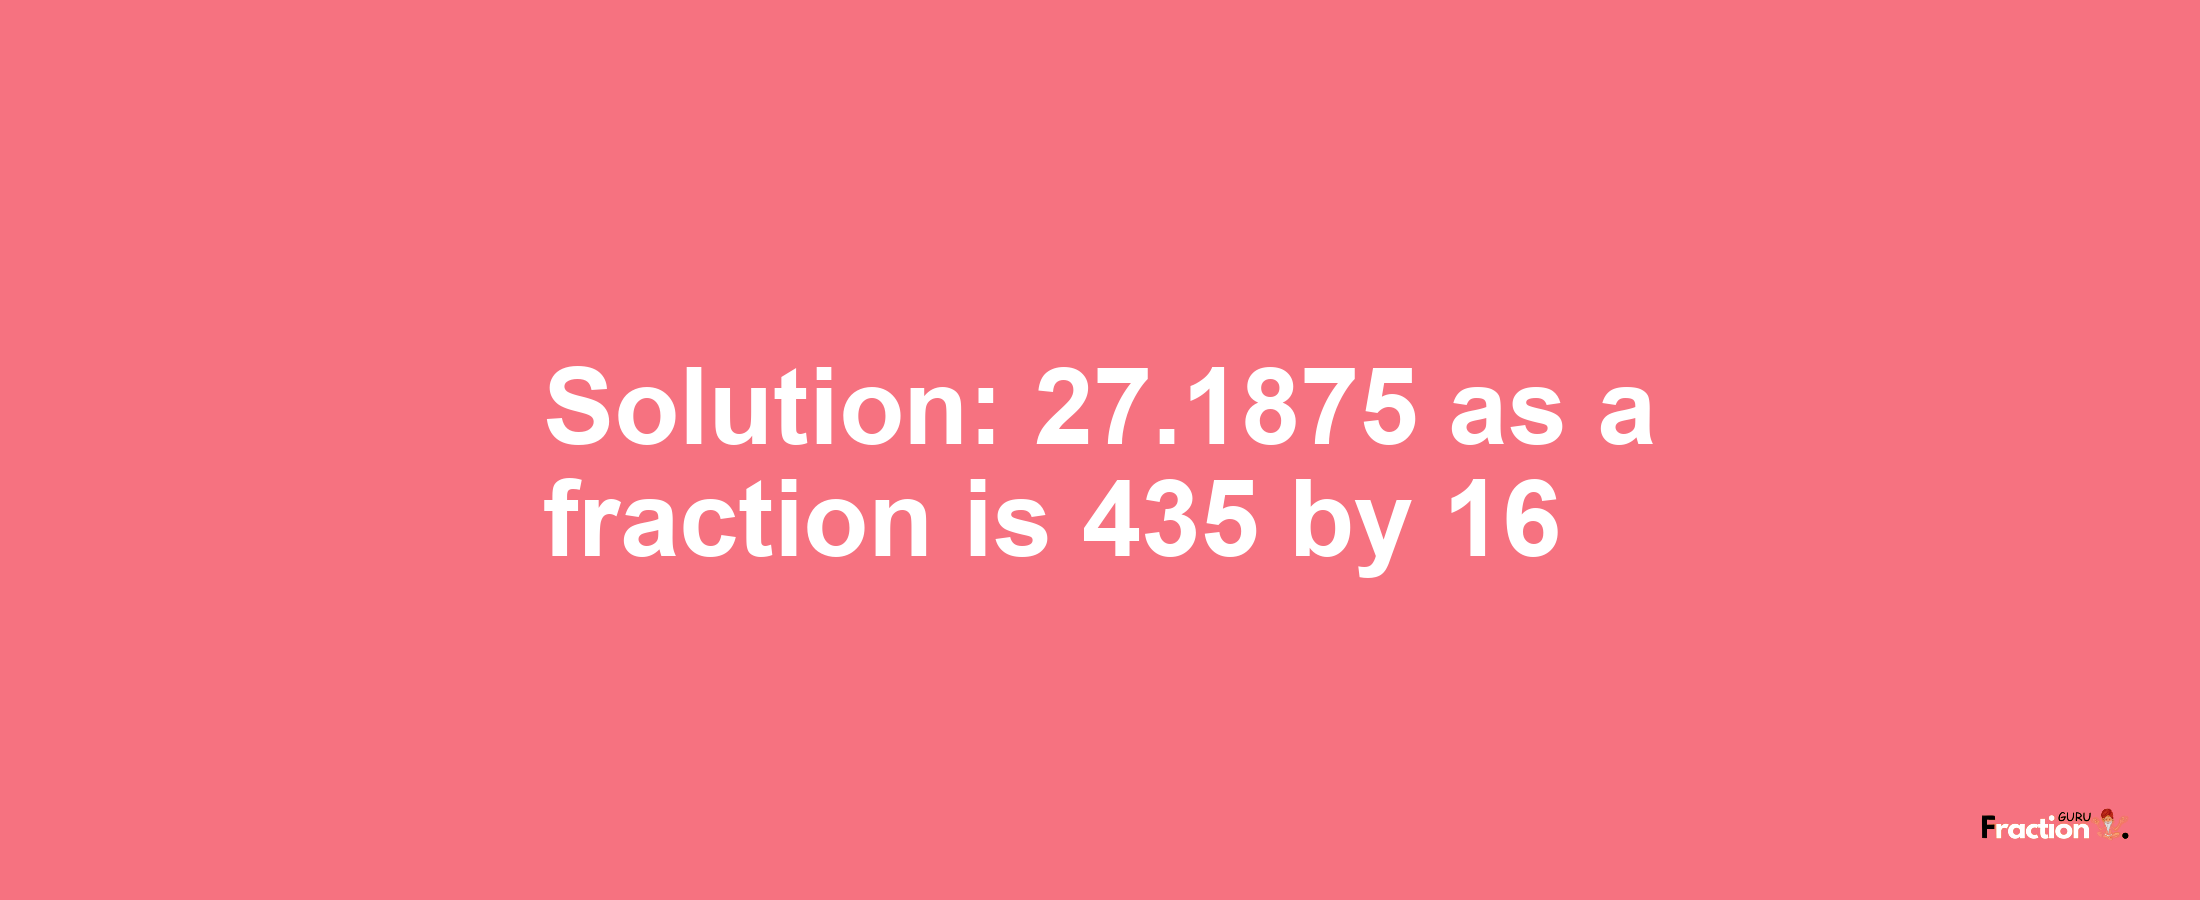 Solution:27.1875 as a fraction is 435/16